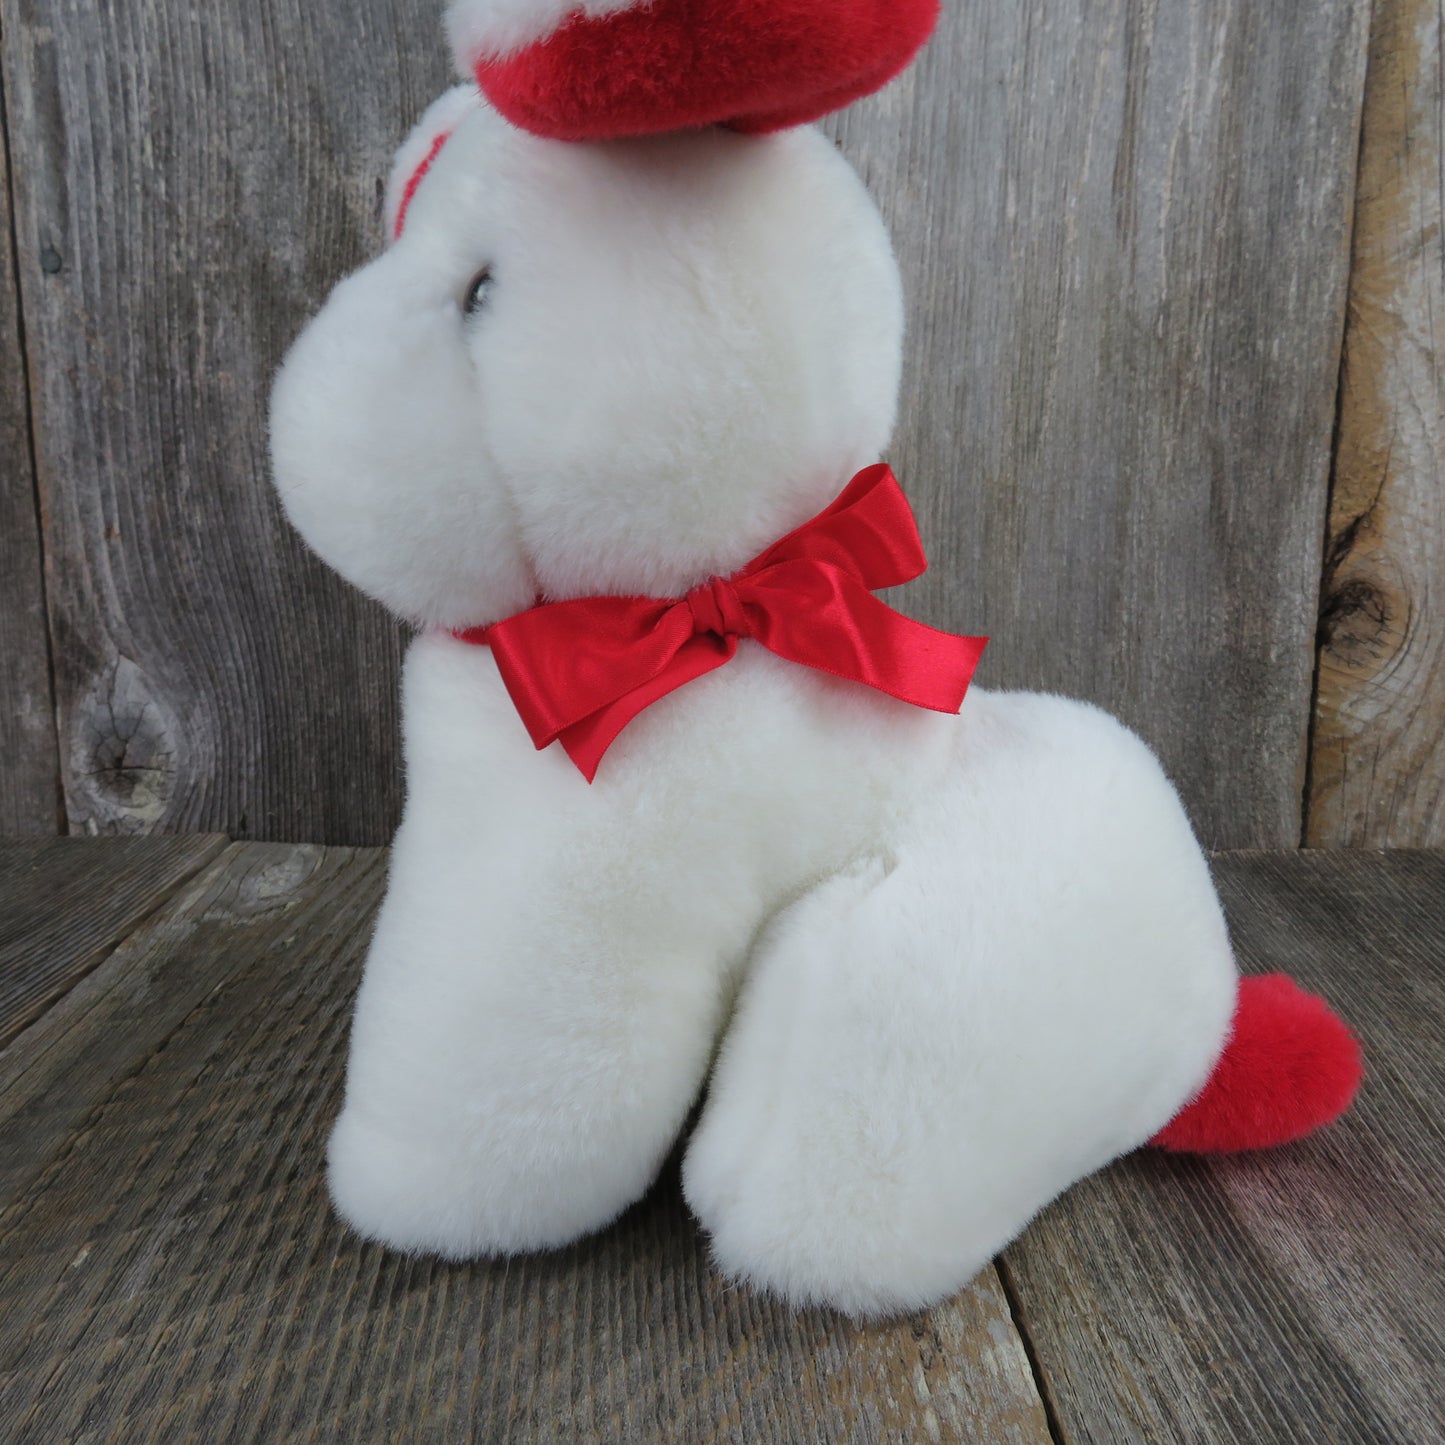 Vintage White Dog Puppy Plush Heart Shaped Flocked Nose Red Ears Mervyn's Playful Plush Red Bow Korea - At Grandma's Table